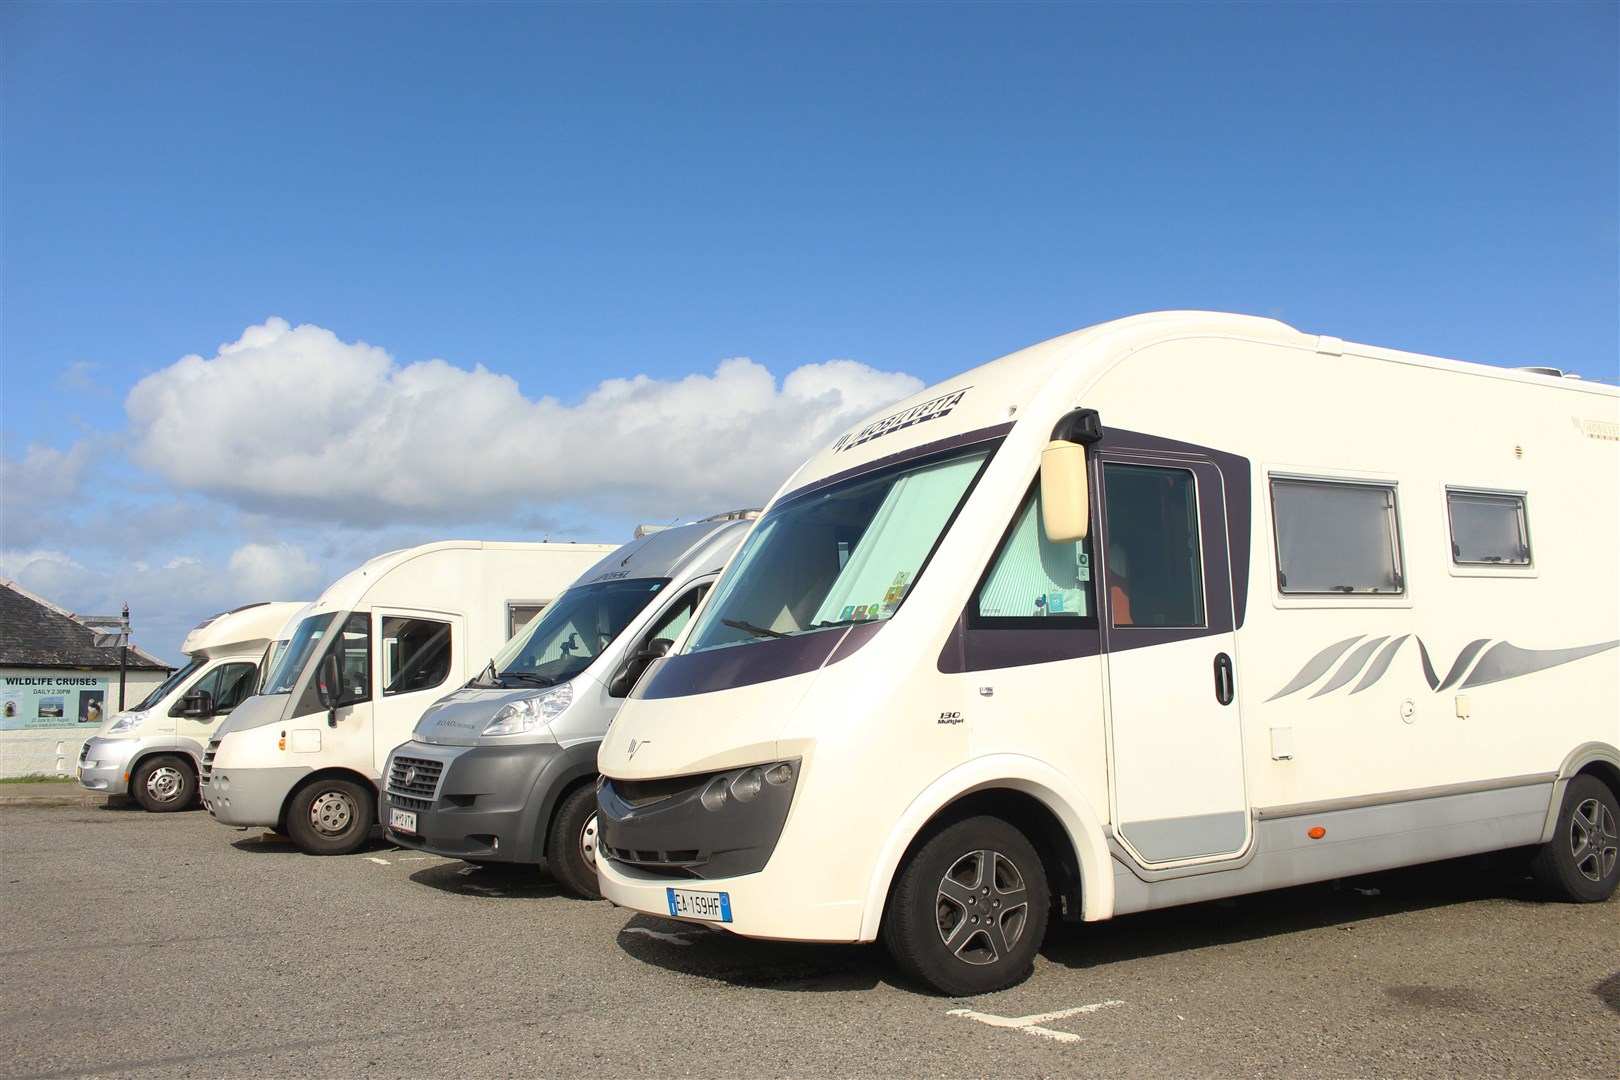 There are continued worries that campervanners will travel to the Highlands during the coronavirus outbreak.